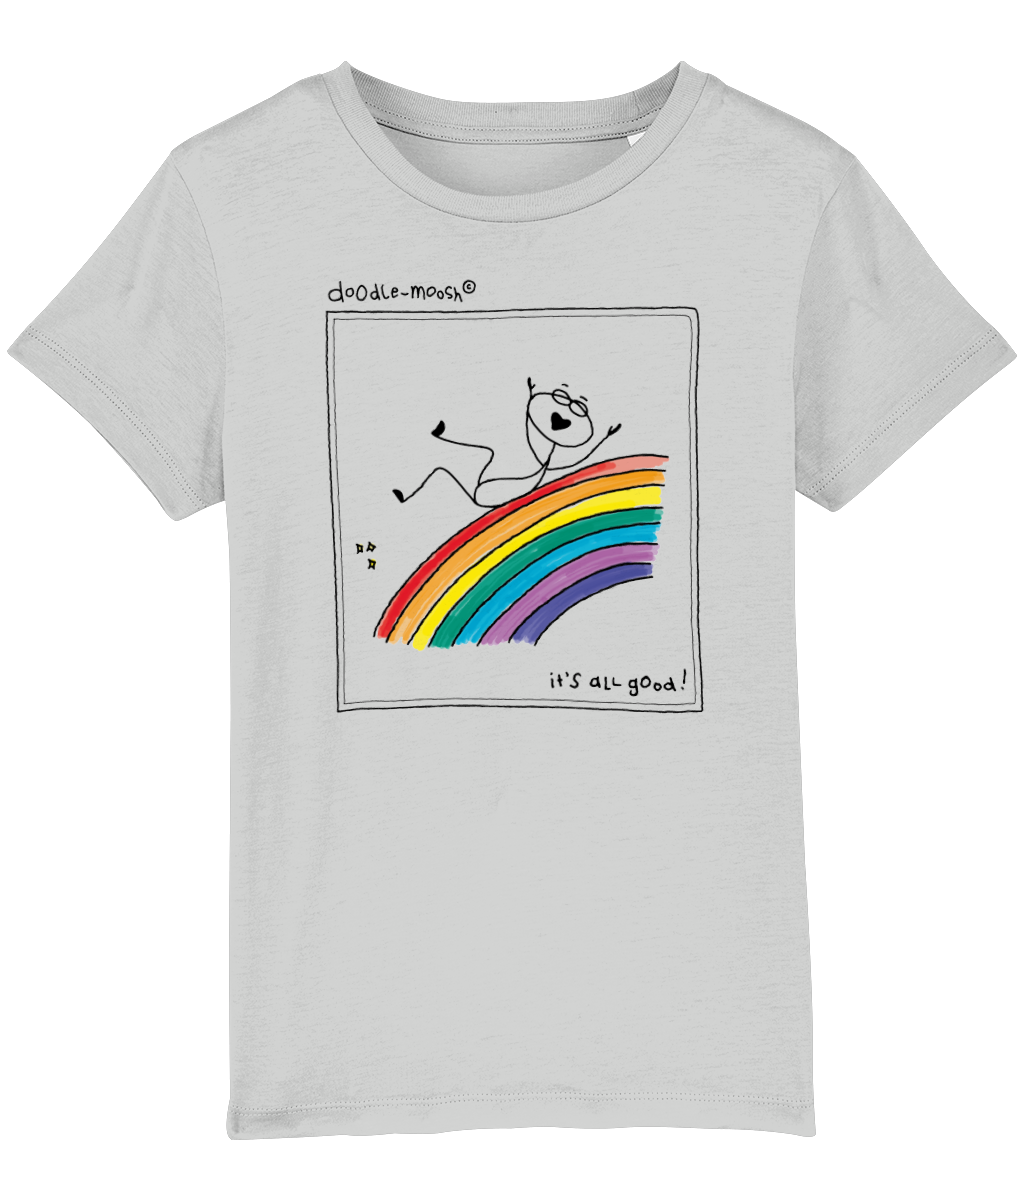 it's all good t-shirt, grey with black, colored rainbow